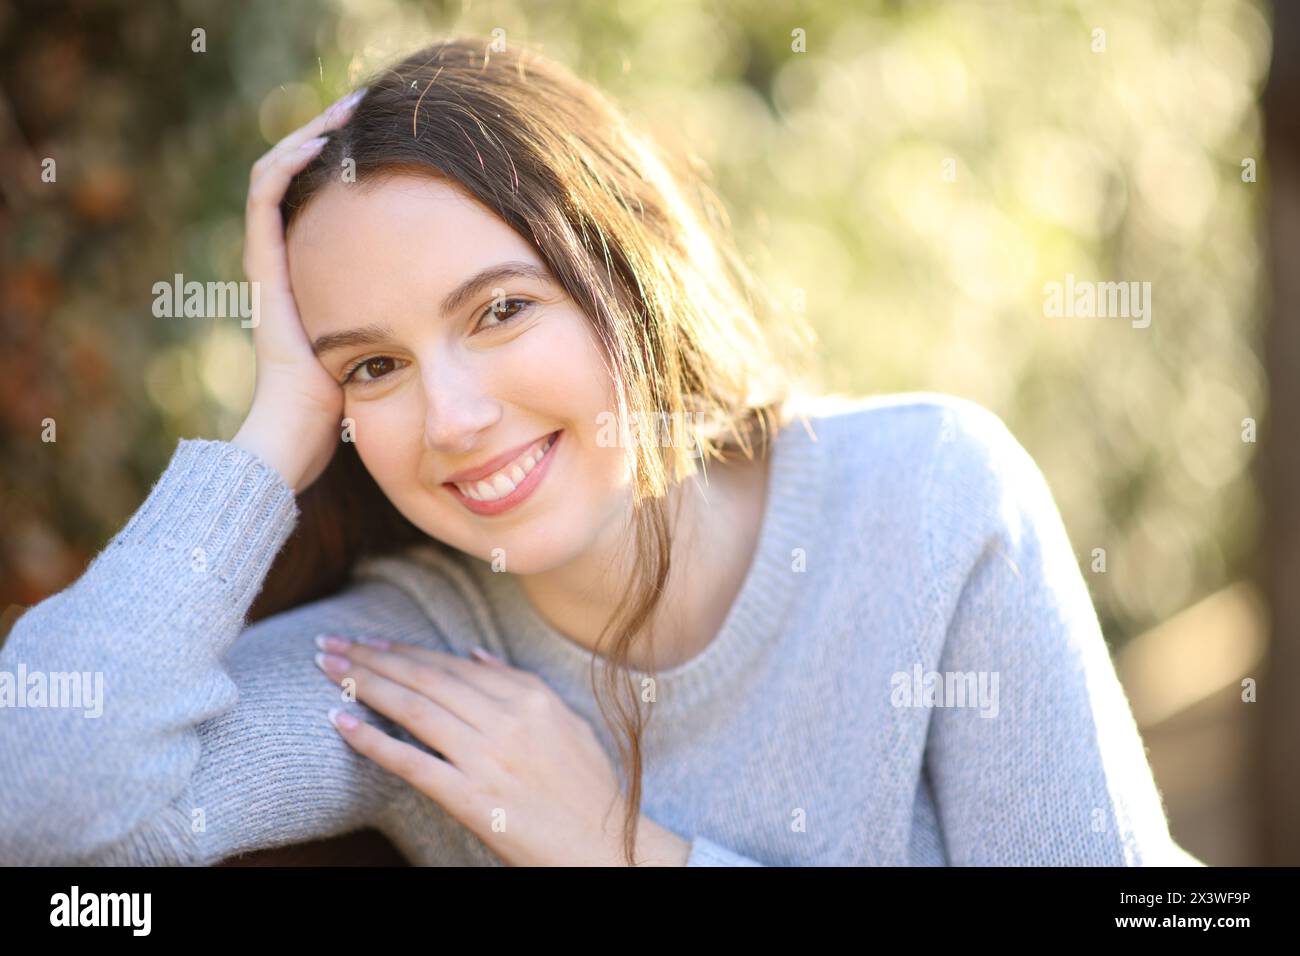 Happy candid woman posing looking at camera smiling in a park Stock Photo